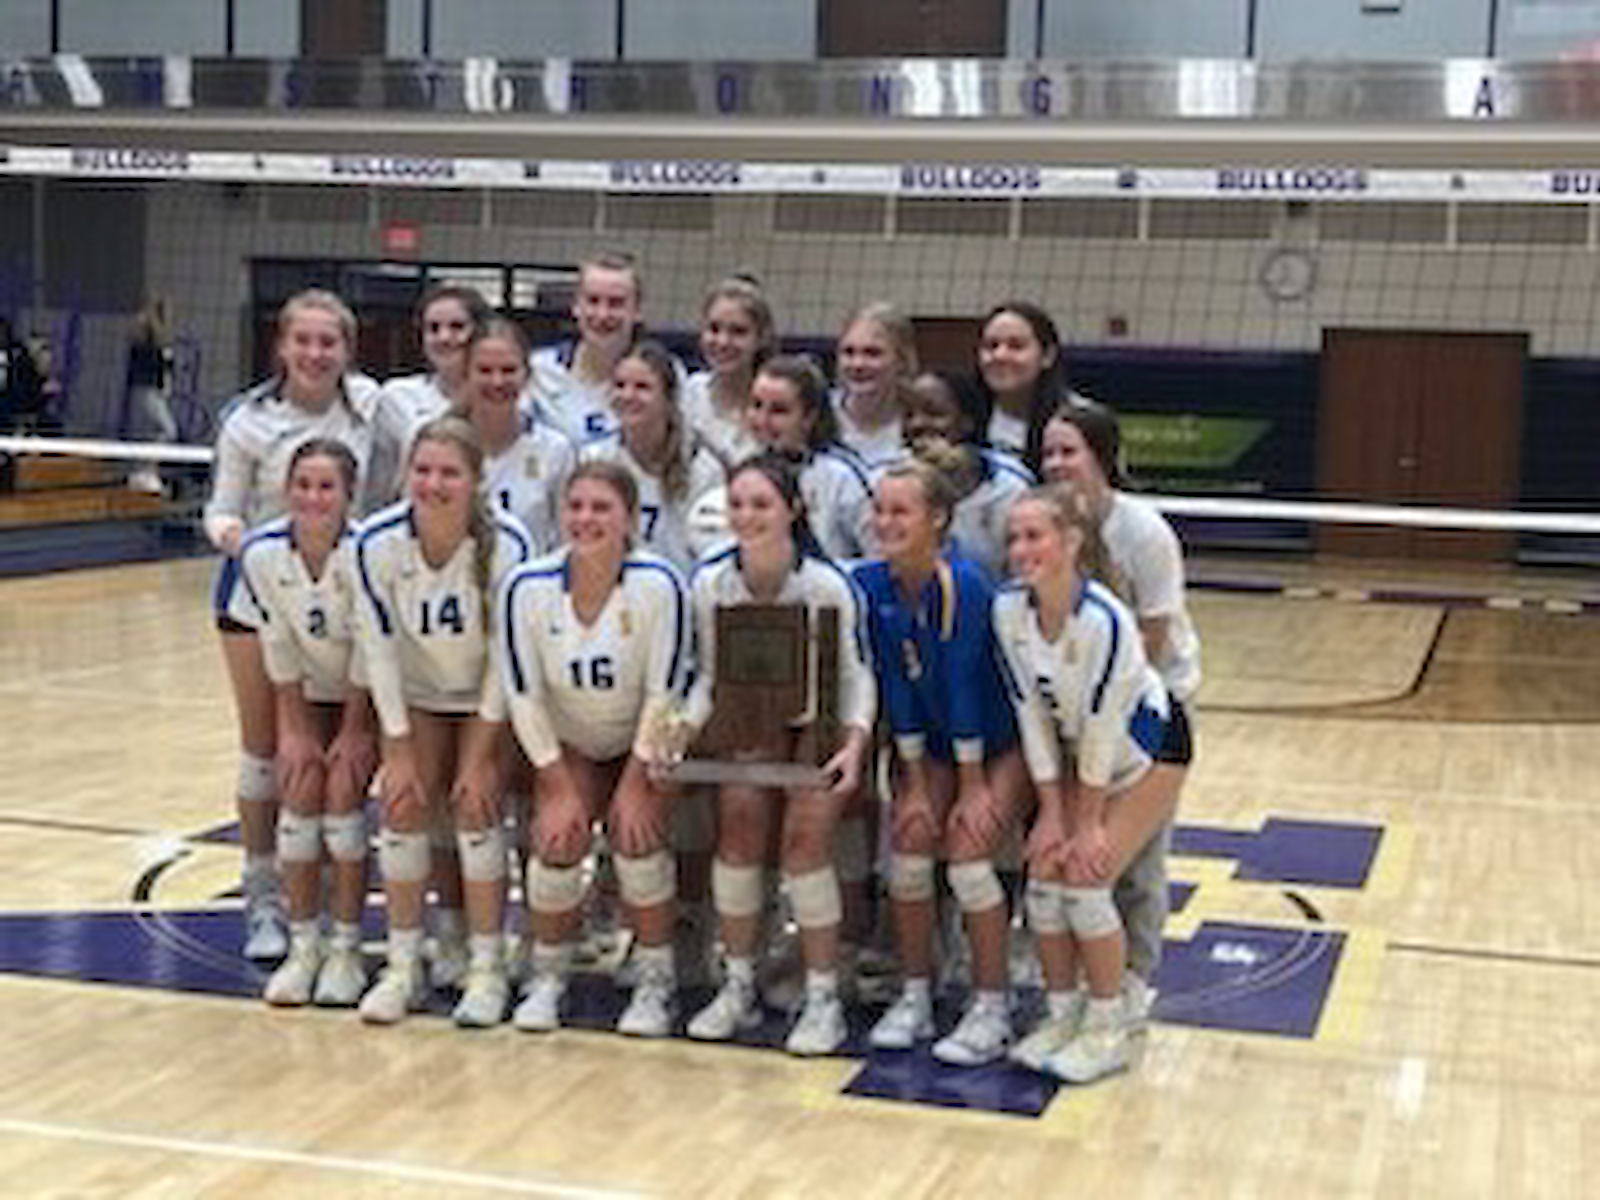 Volleyball wins the Sectional cover photo